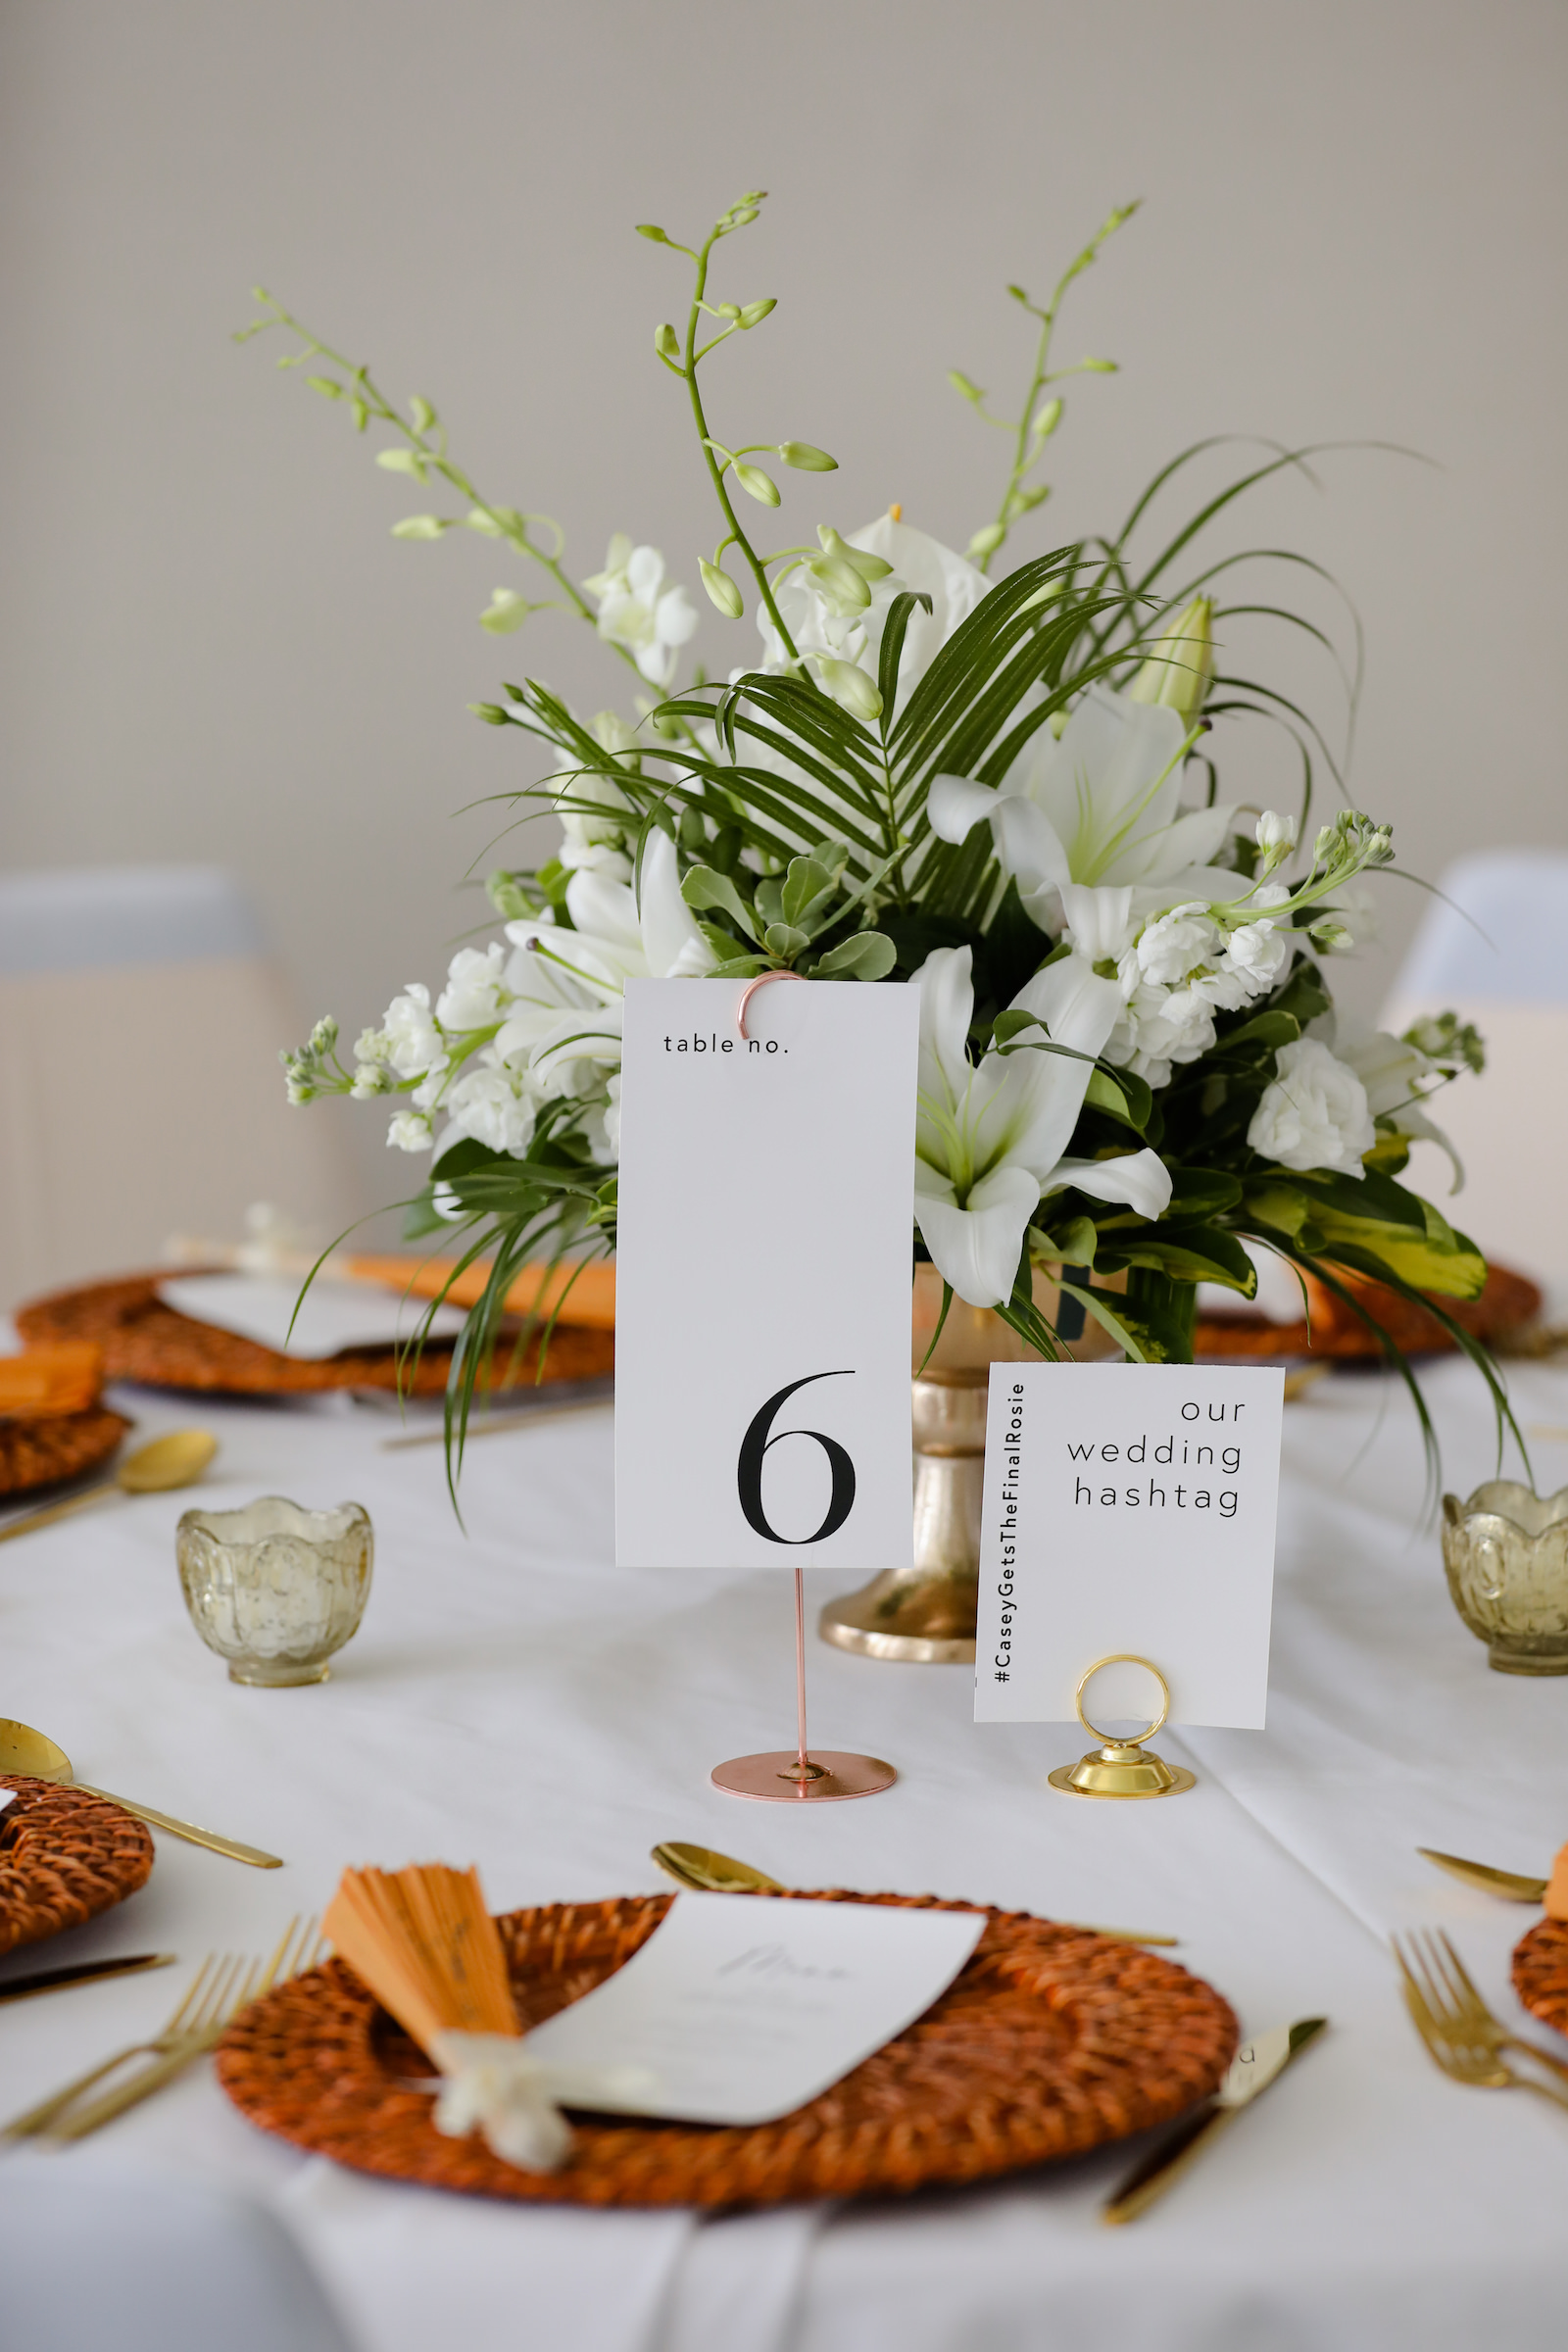 Modern Tablescape and Table Numbers with Tall Gold Centerpieces with Greenery and White Flowers and Woven Chargers